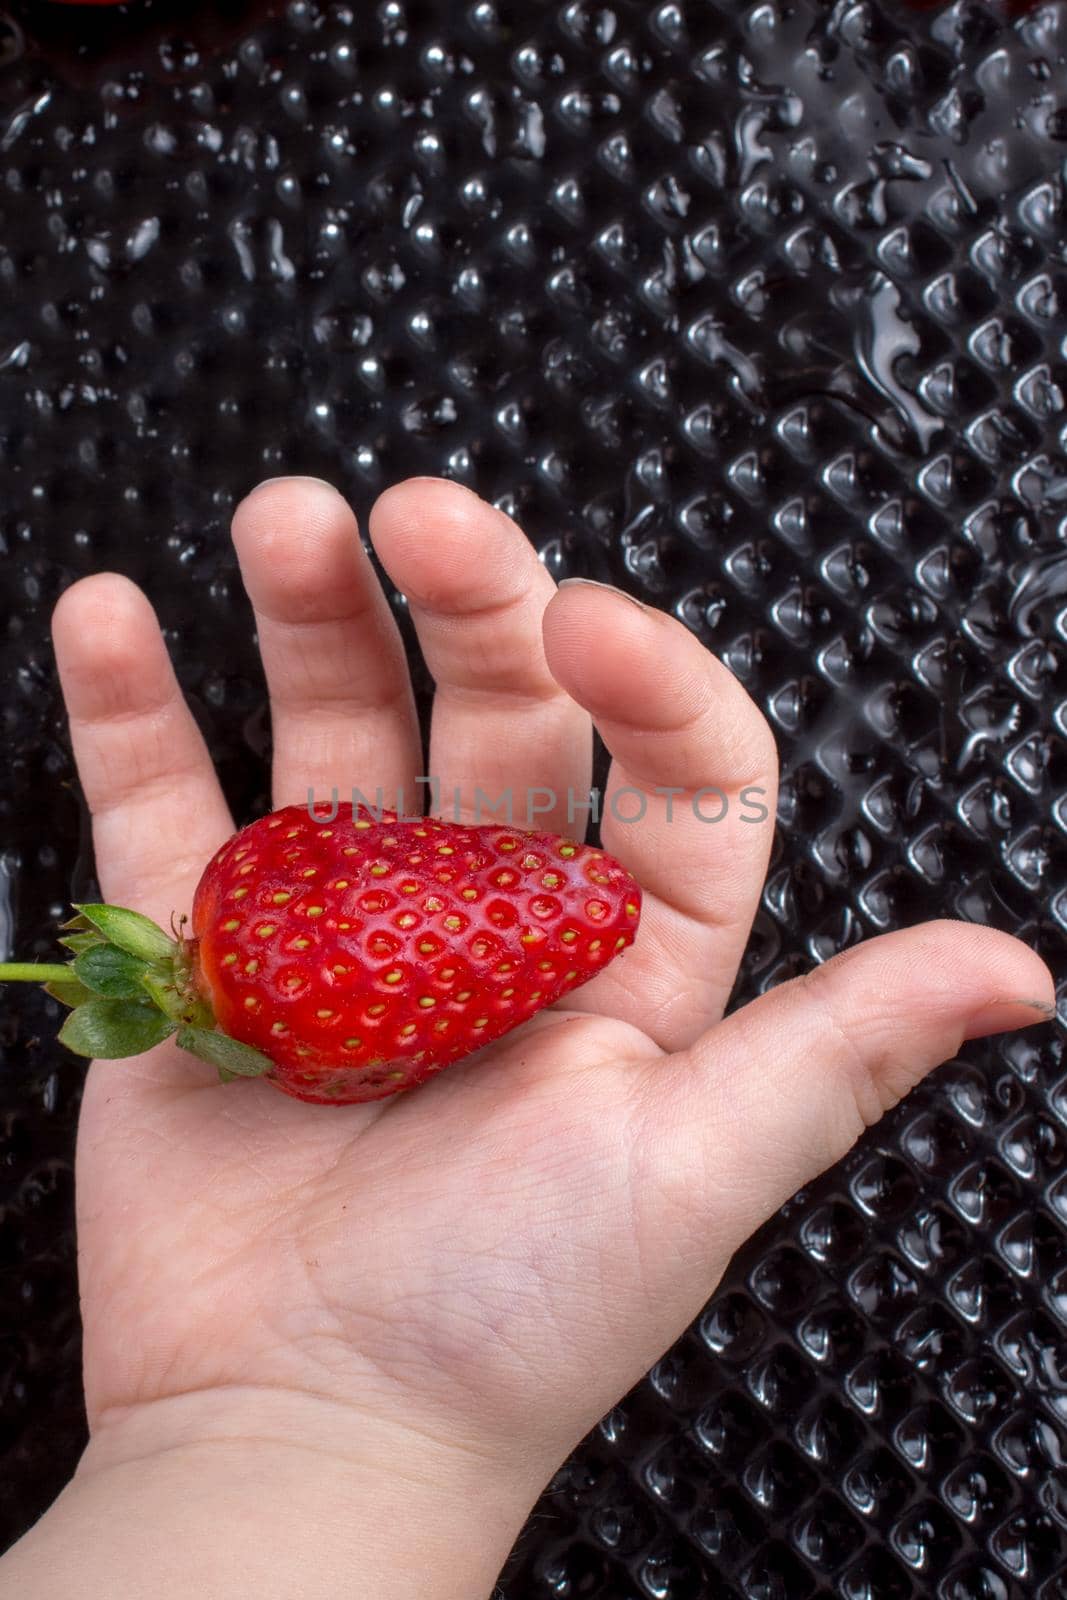 Sweet and ripe strawberry fruit in hand by berkay